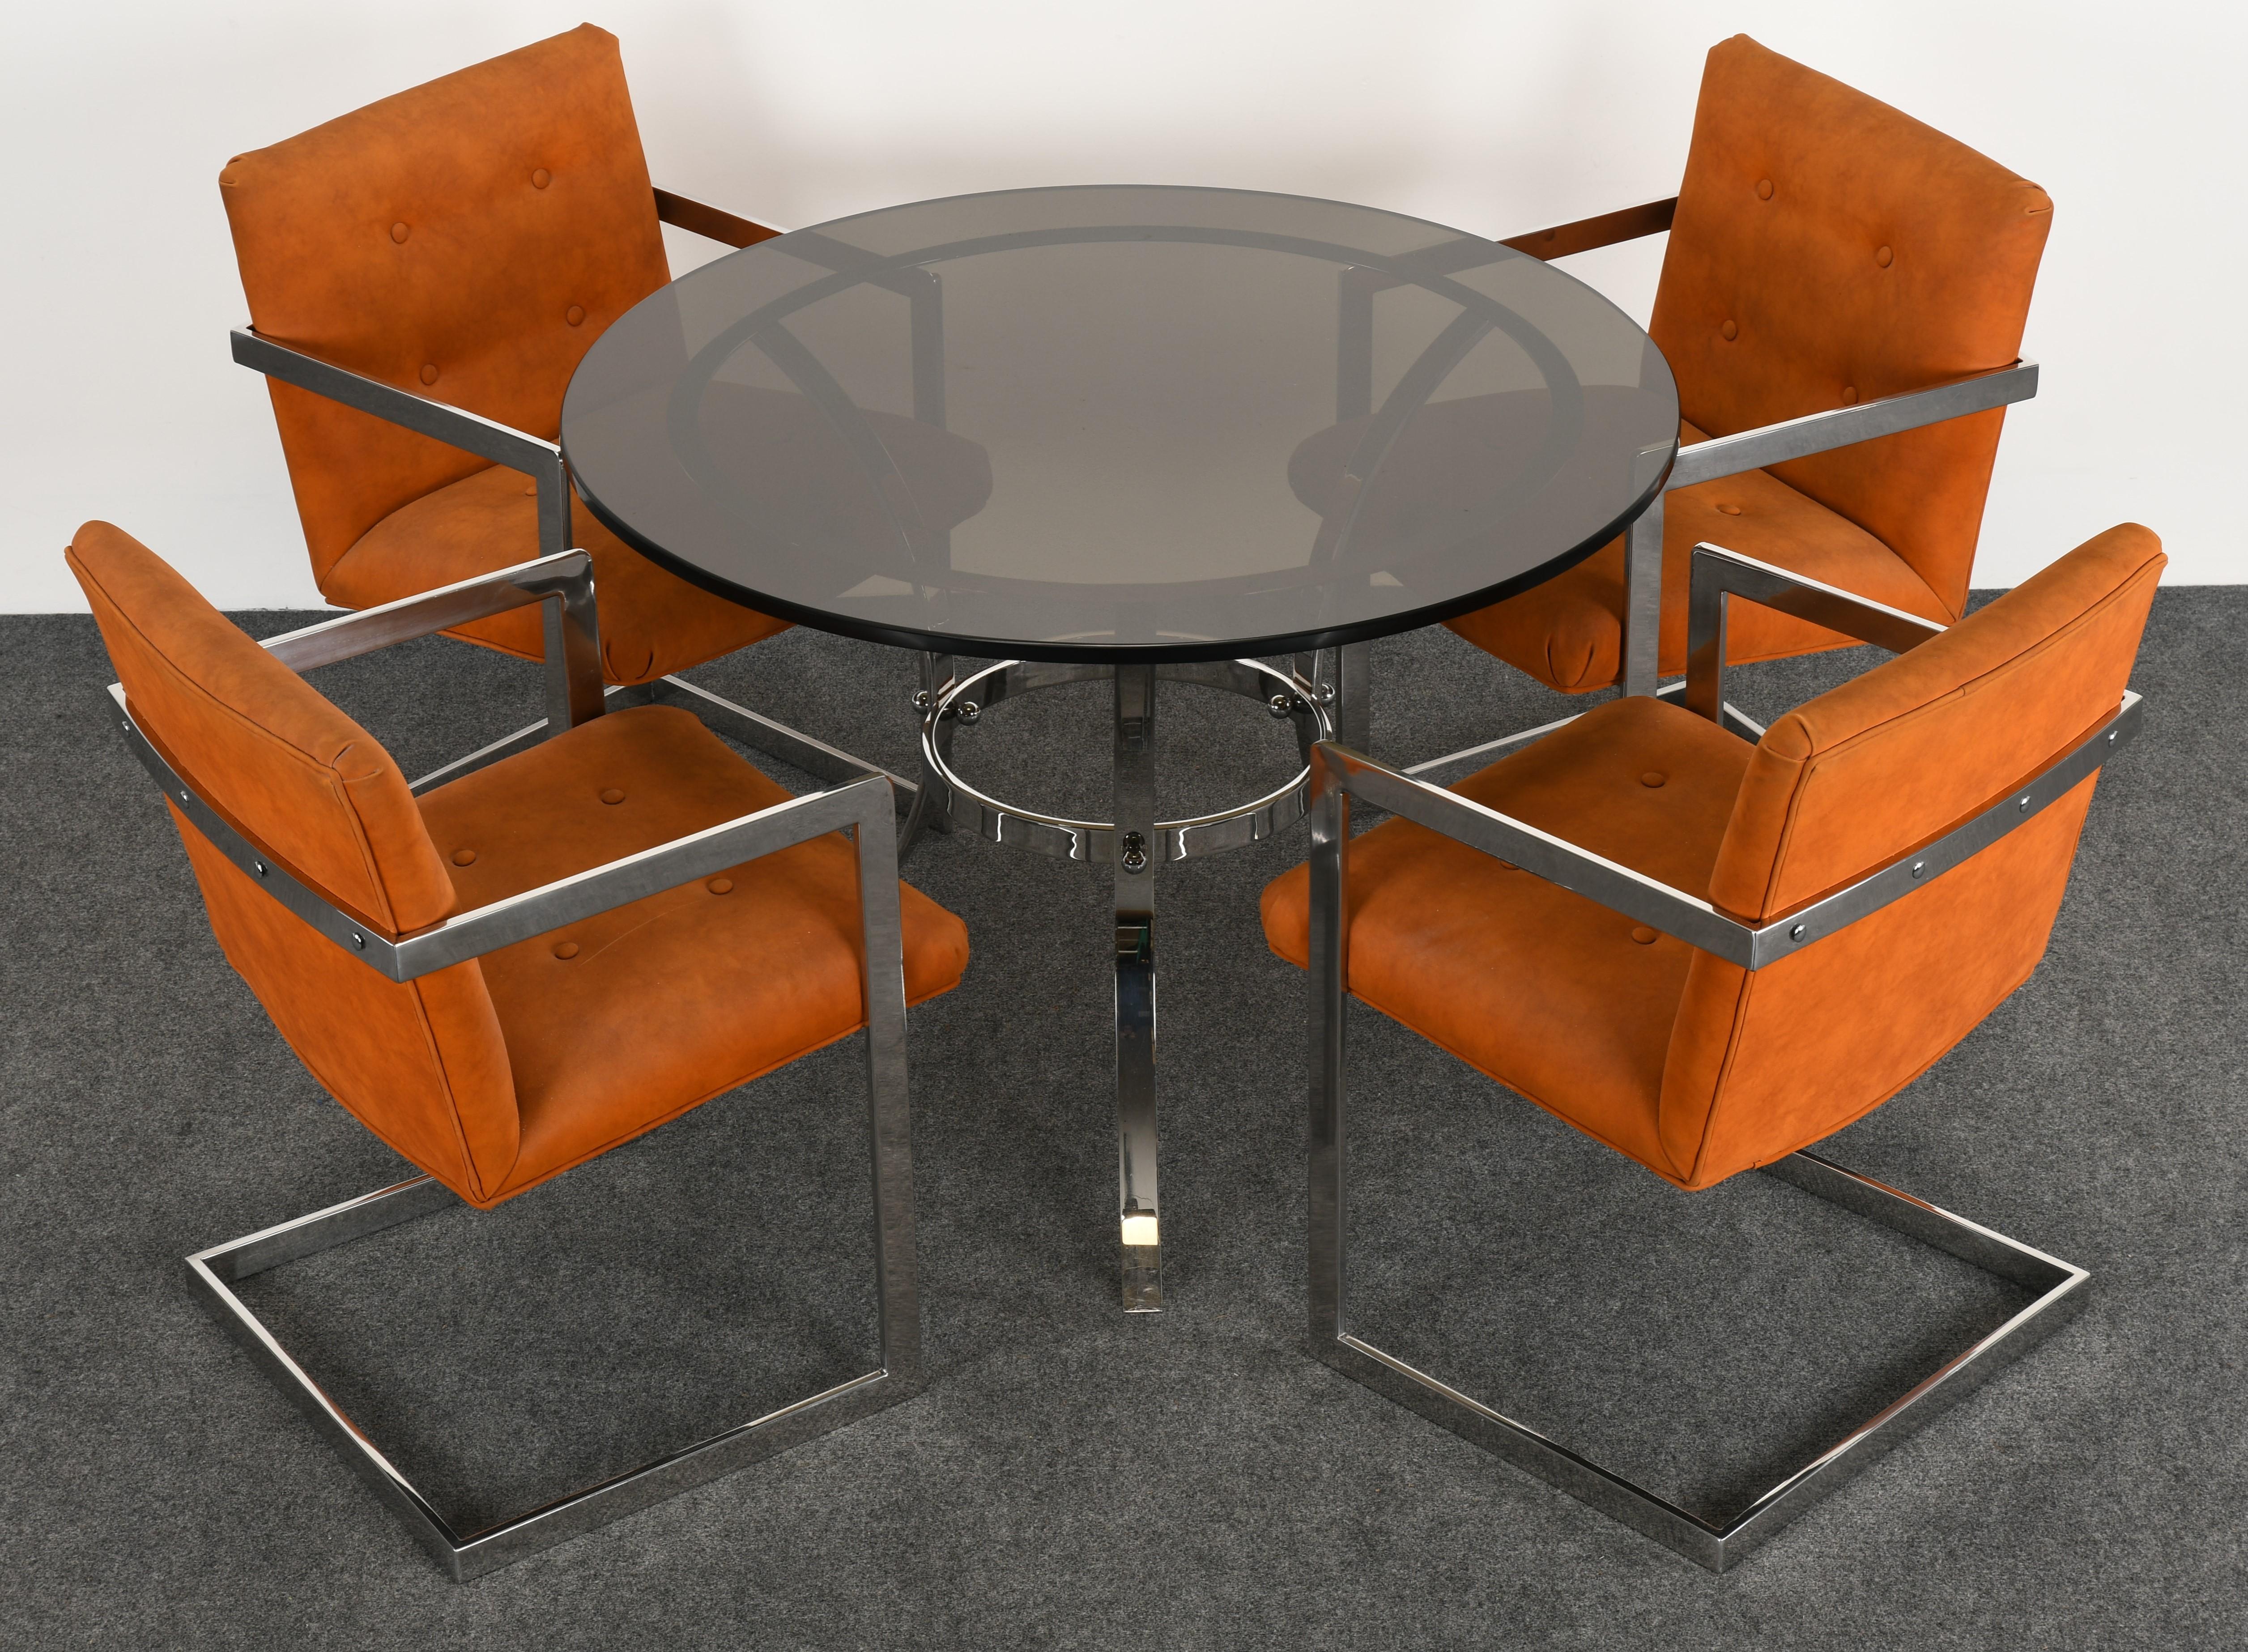 A modern chrome dining set by Bernhardt Furniture Company. This Milo Baughman style dinette set includes a chrome dining table with smokey glass and a set of four orange faux suede armchairs. This set in very good condition with age-appropriate